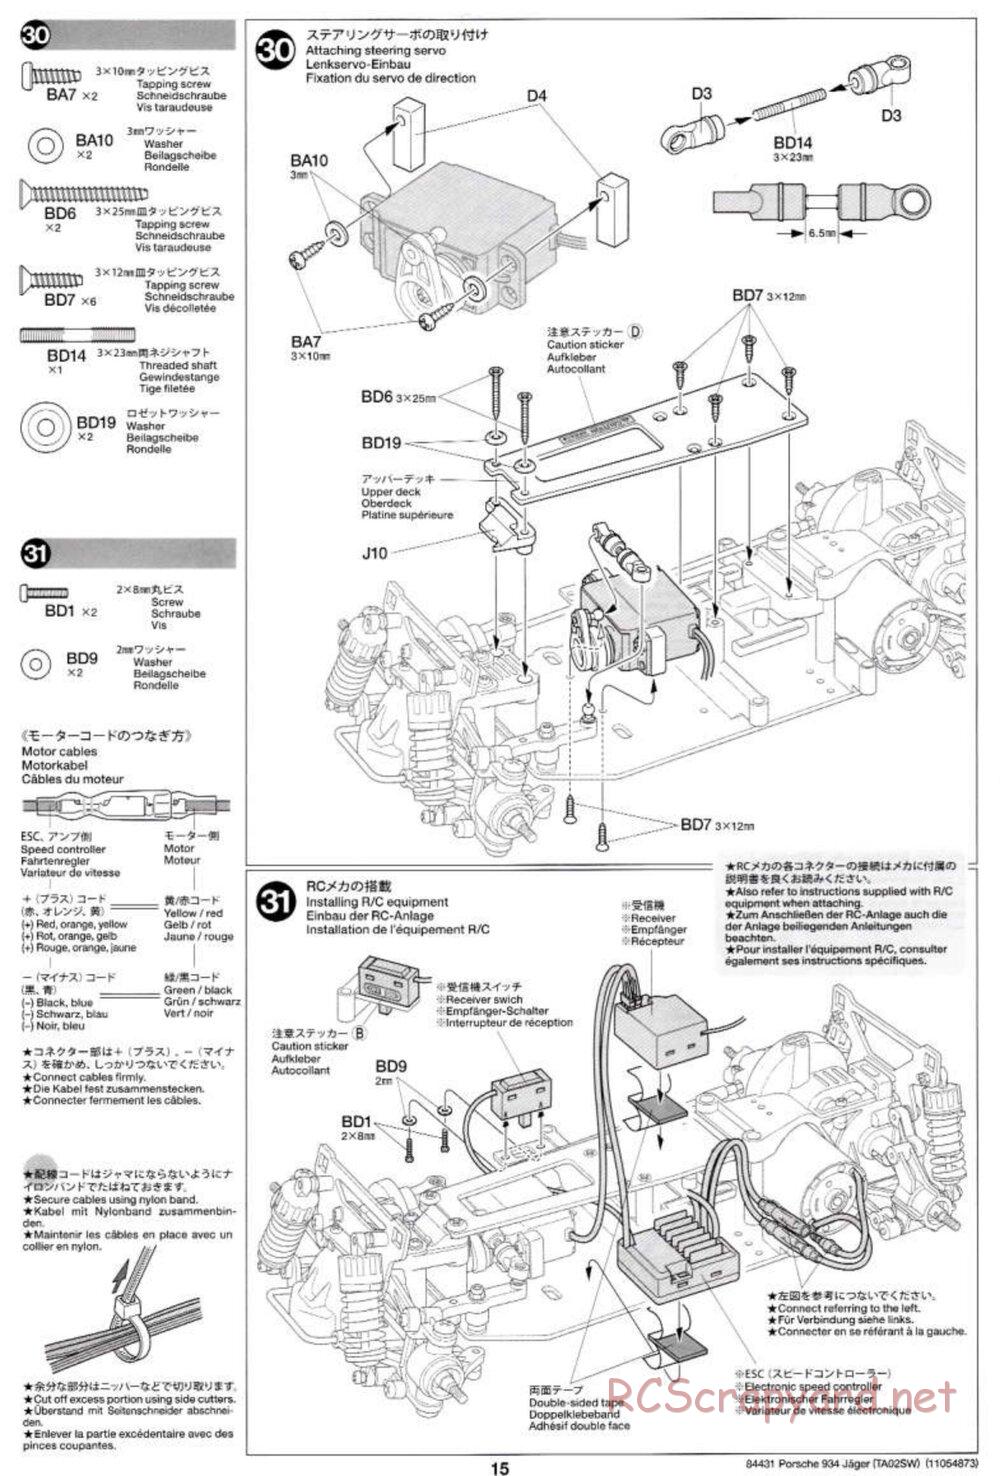 Tamiya - Porsche Turbo RSR Type 934 Jagermeister - TA-02SW Chassis - Manual - Page 15